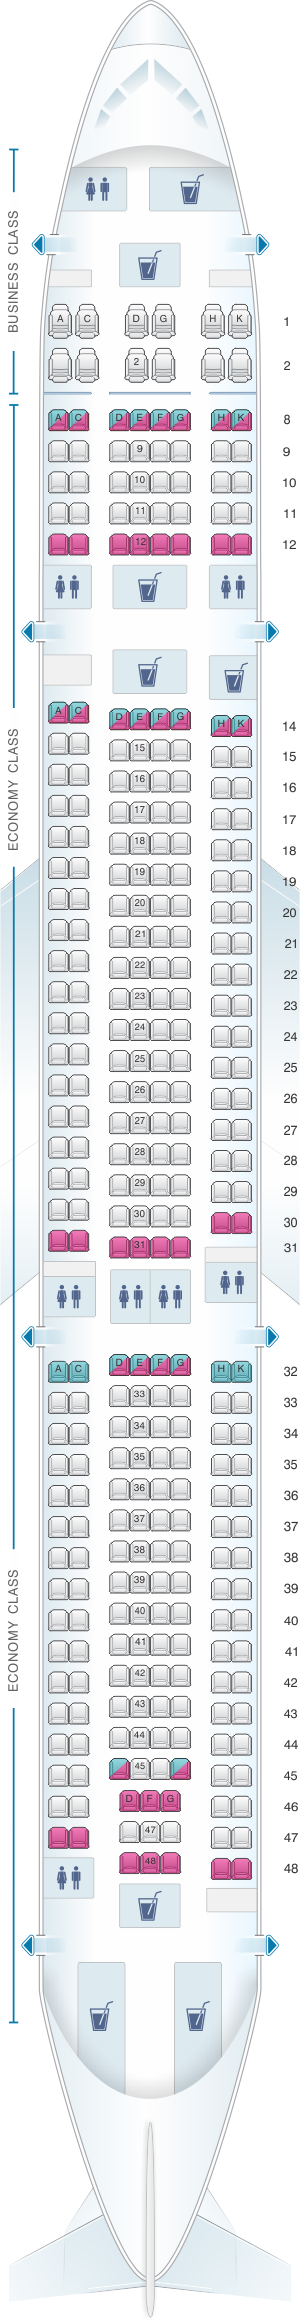 Seat map for Hi Fly Airbus A330 300 325pax